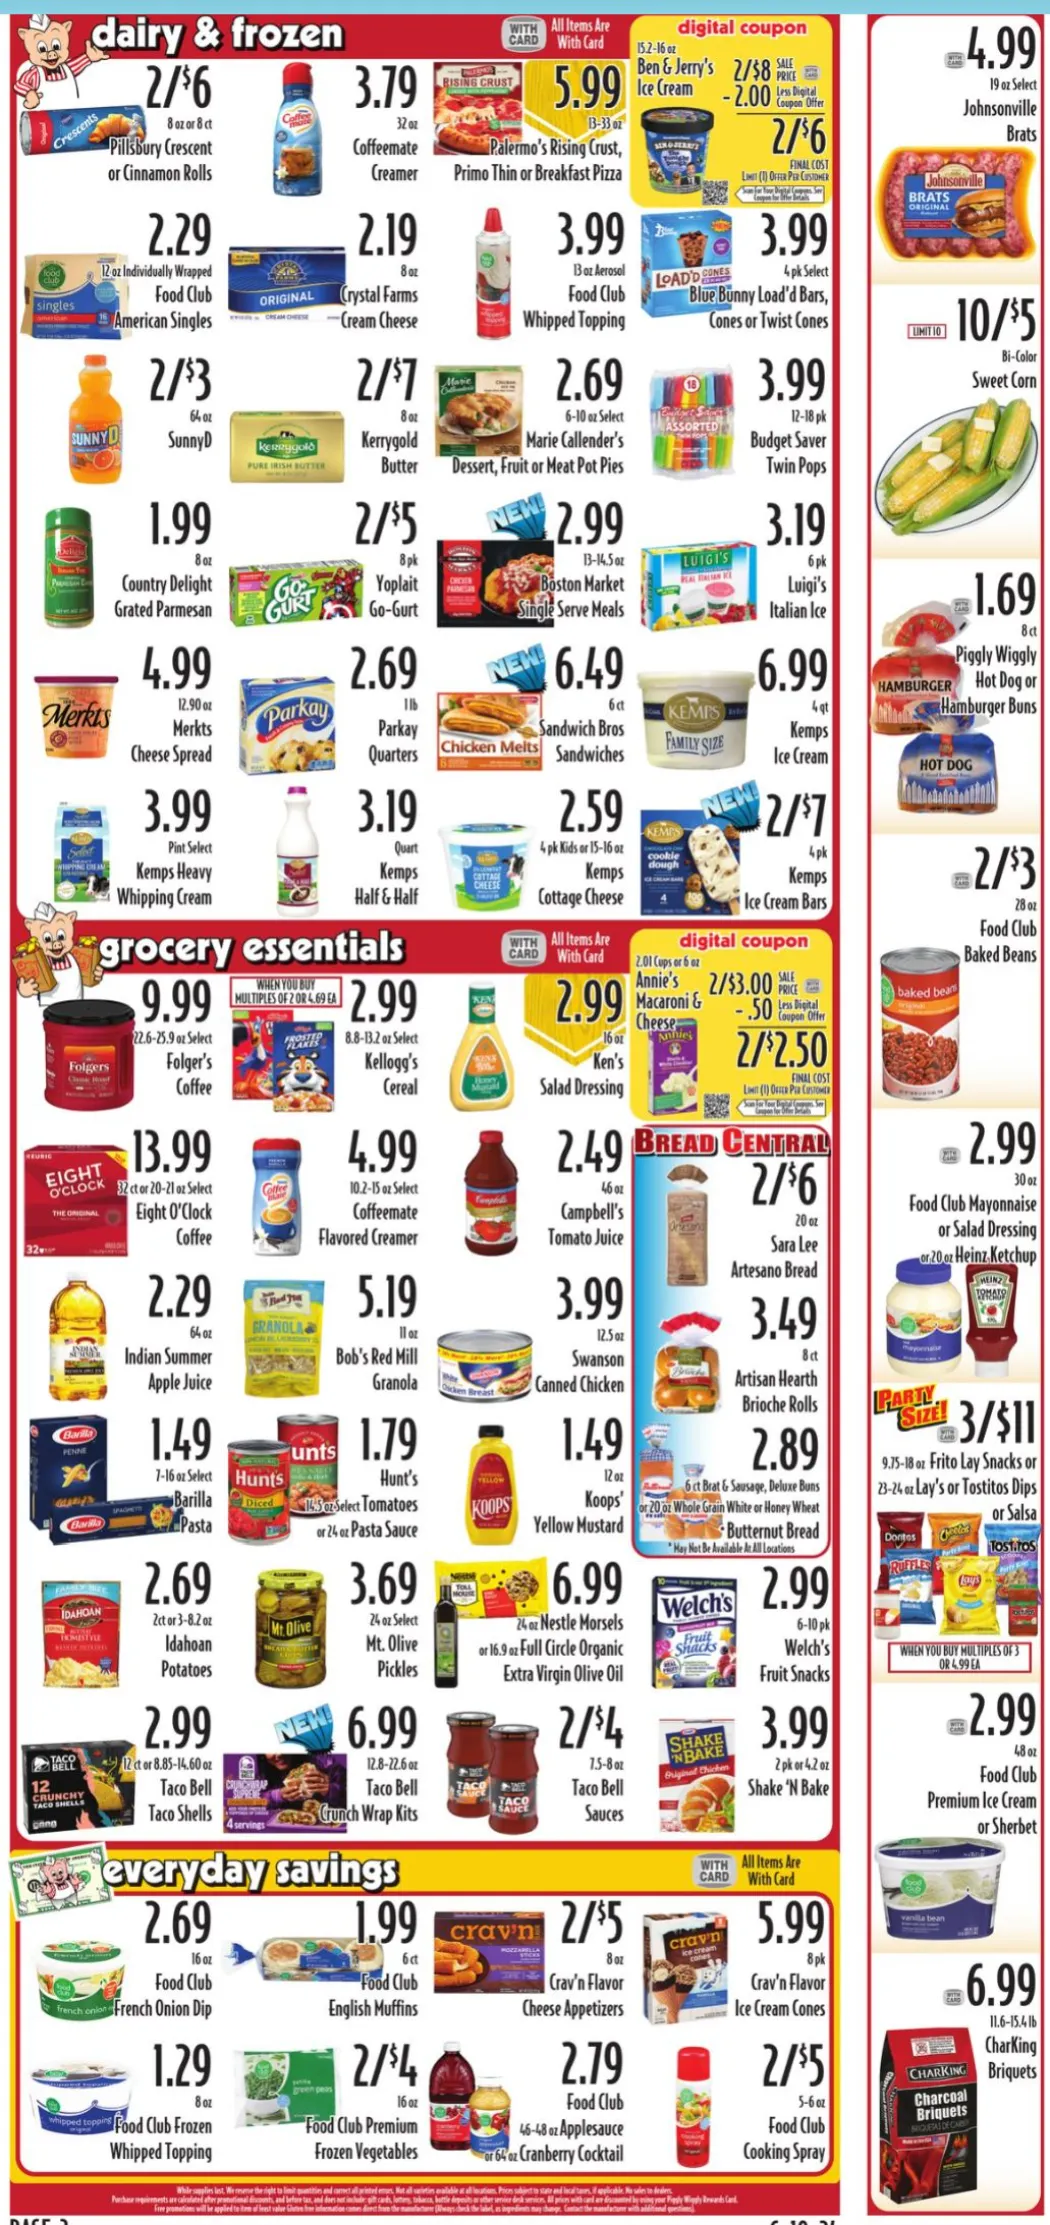 Piggly Wiggly Weekly Ad July 2024 Weekly Sales, Deals, Discounts and Digital Coupons.